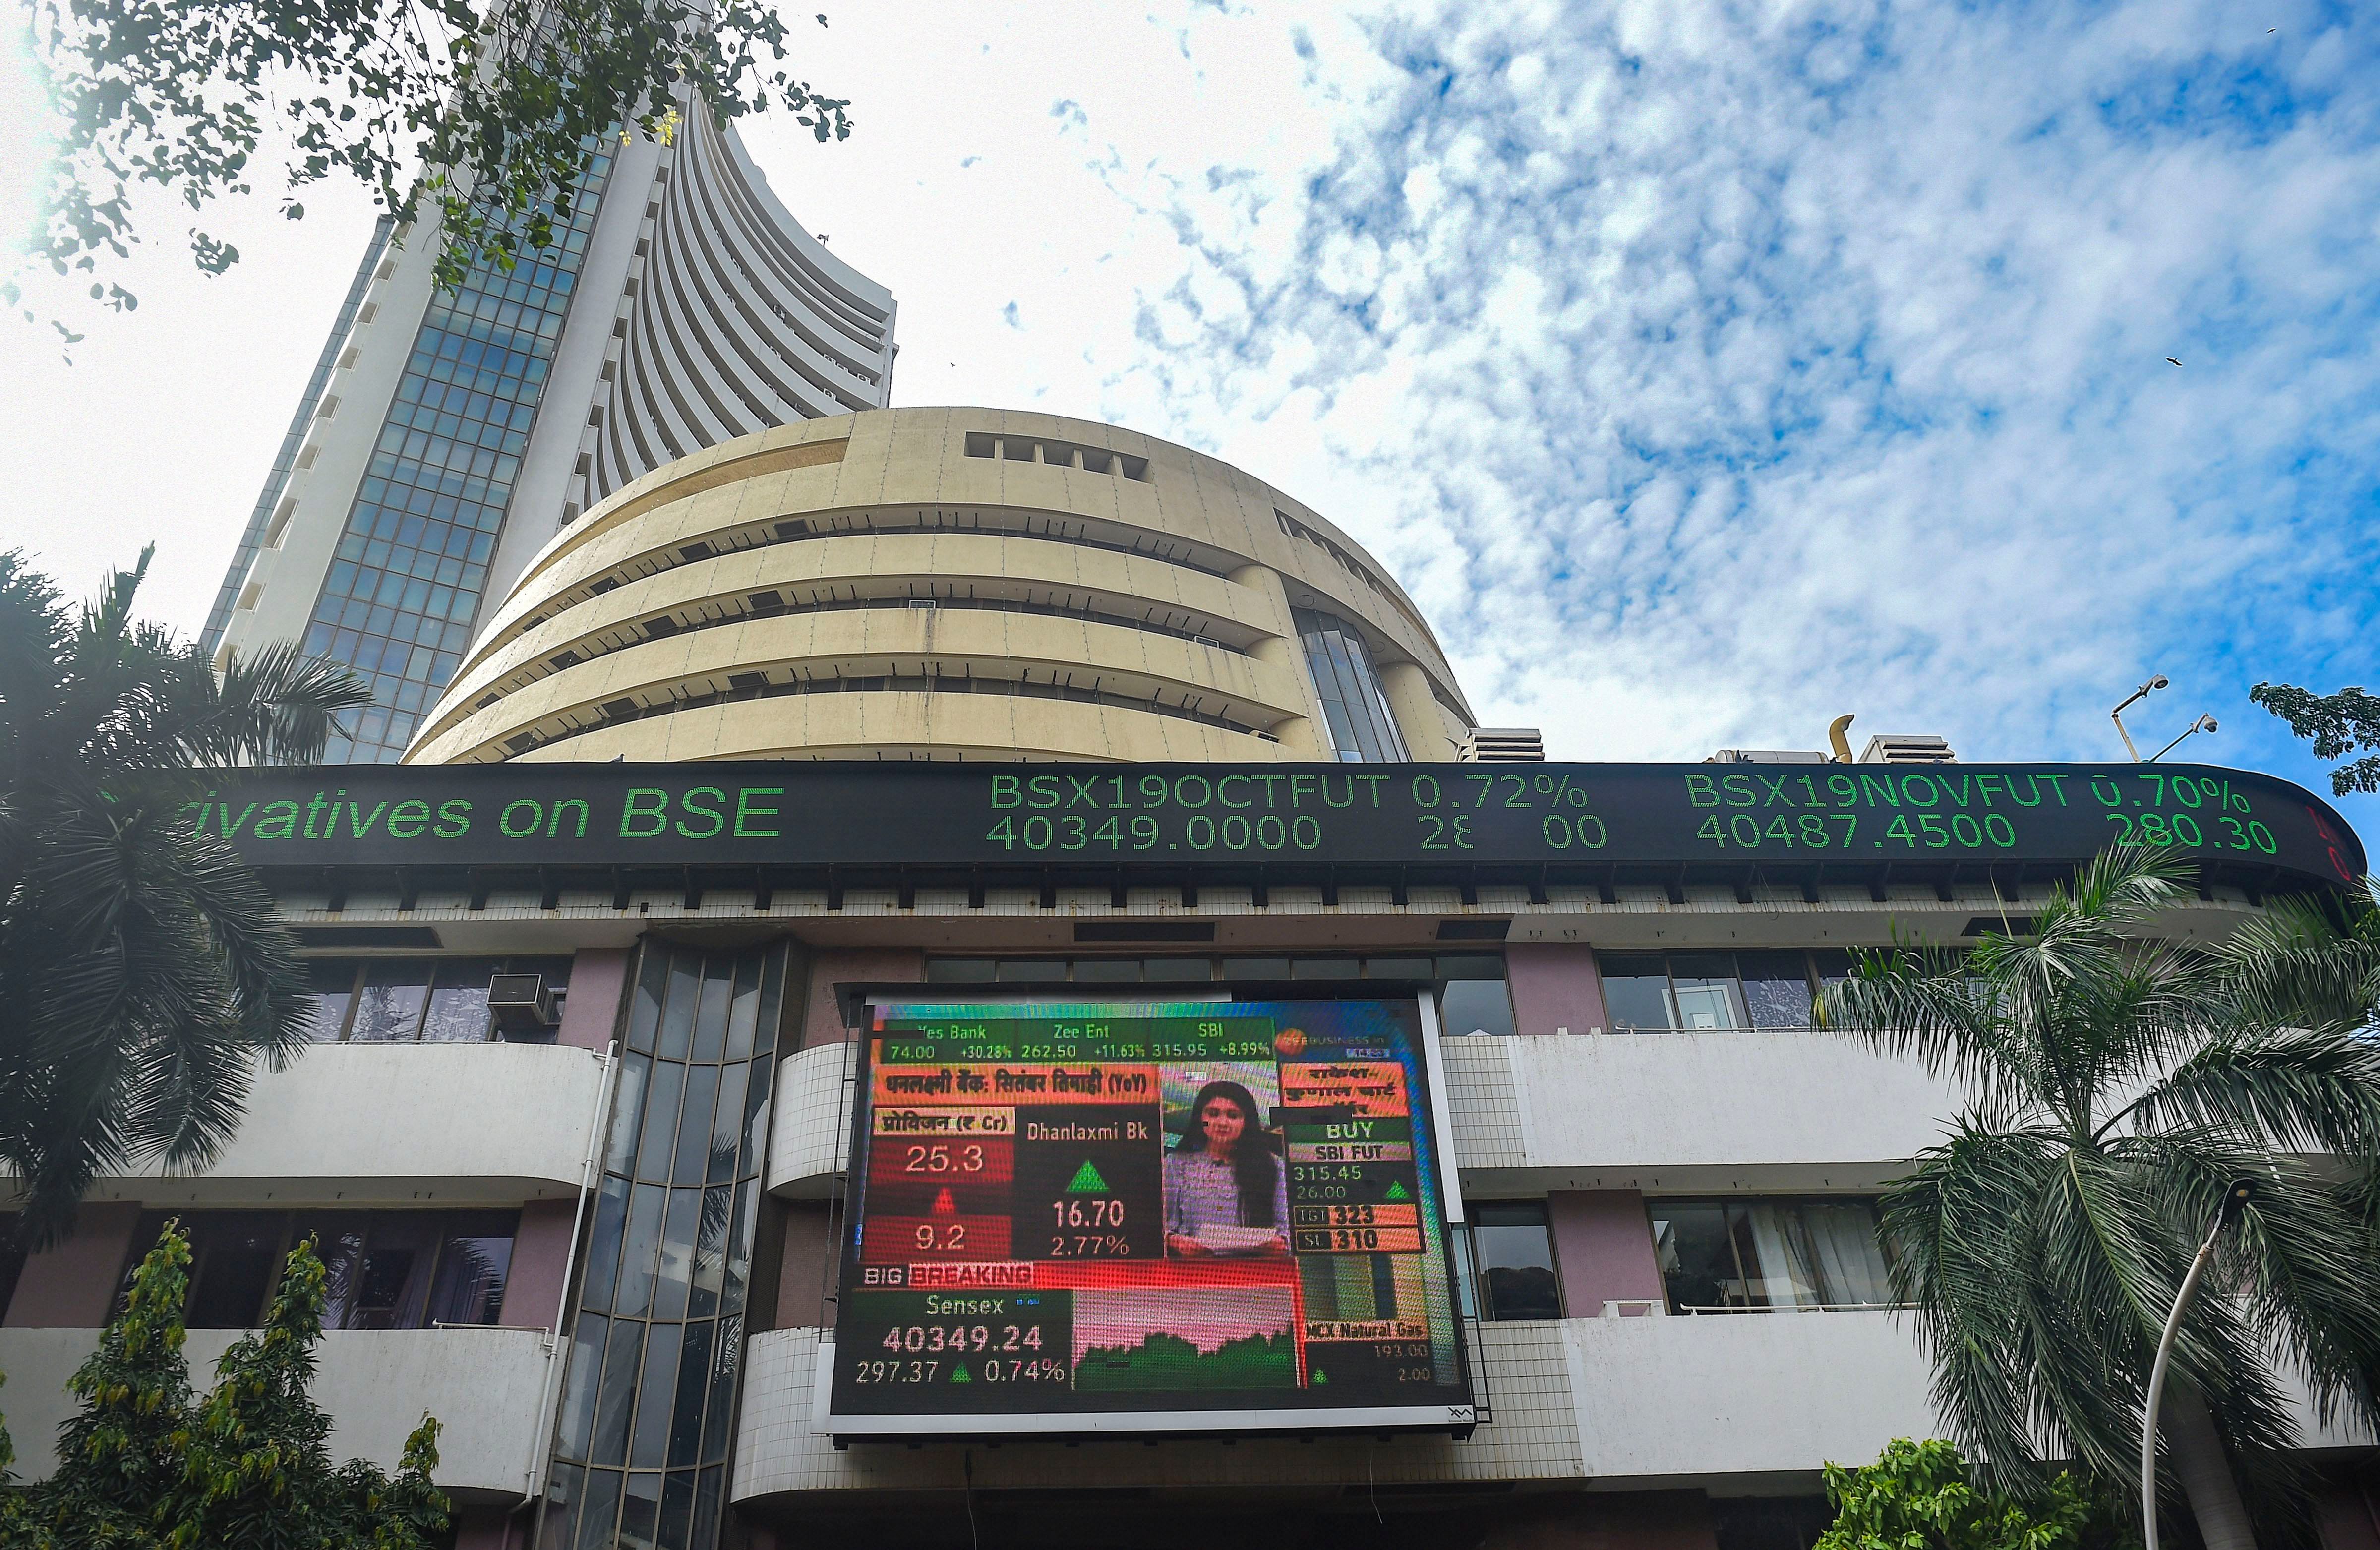 A view of the the stock prices displayed on a digital screen outside BSE building, in Mumbai. (PTI Photo)